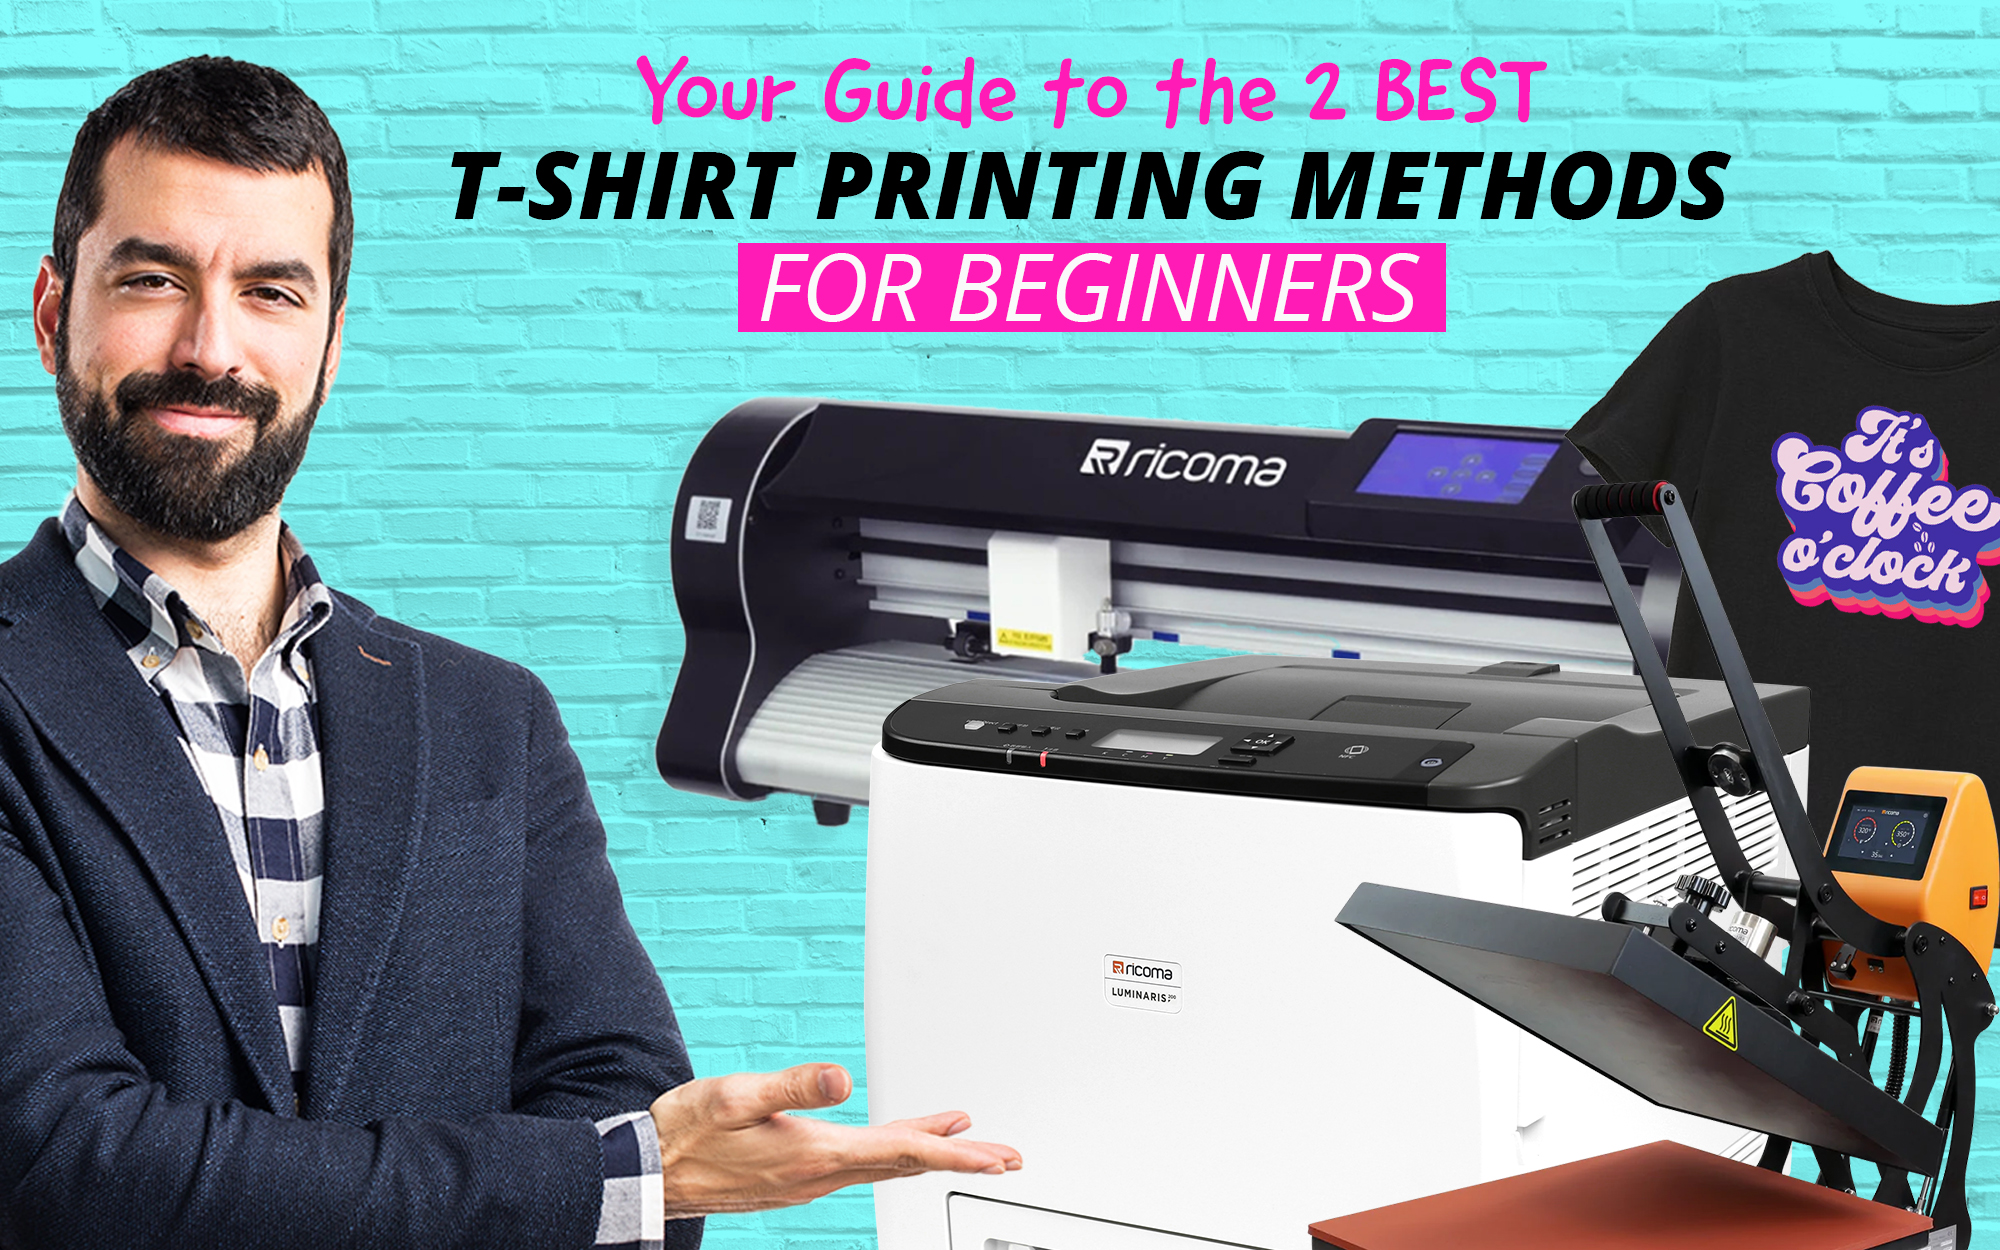 Advice on Purchasing Wholesale Shirts for New Printers